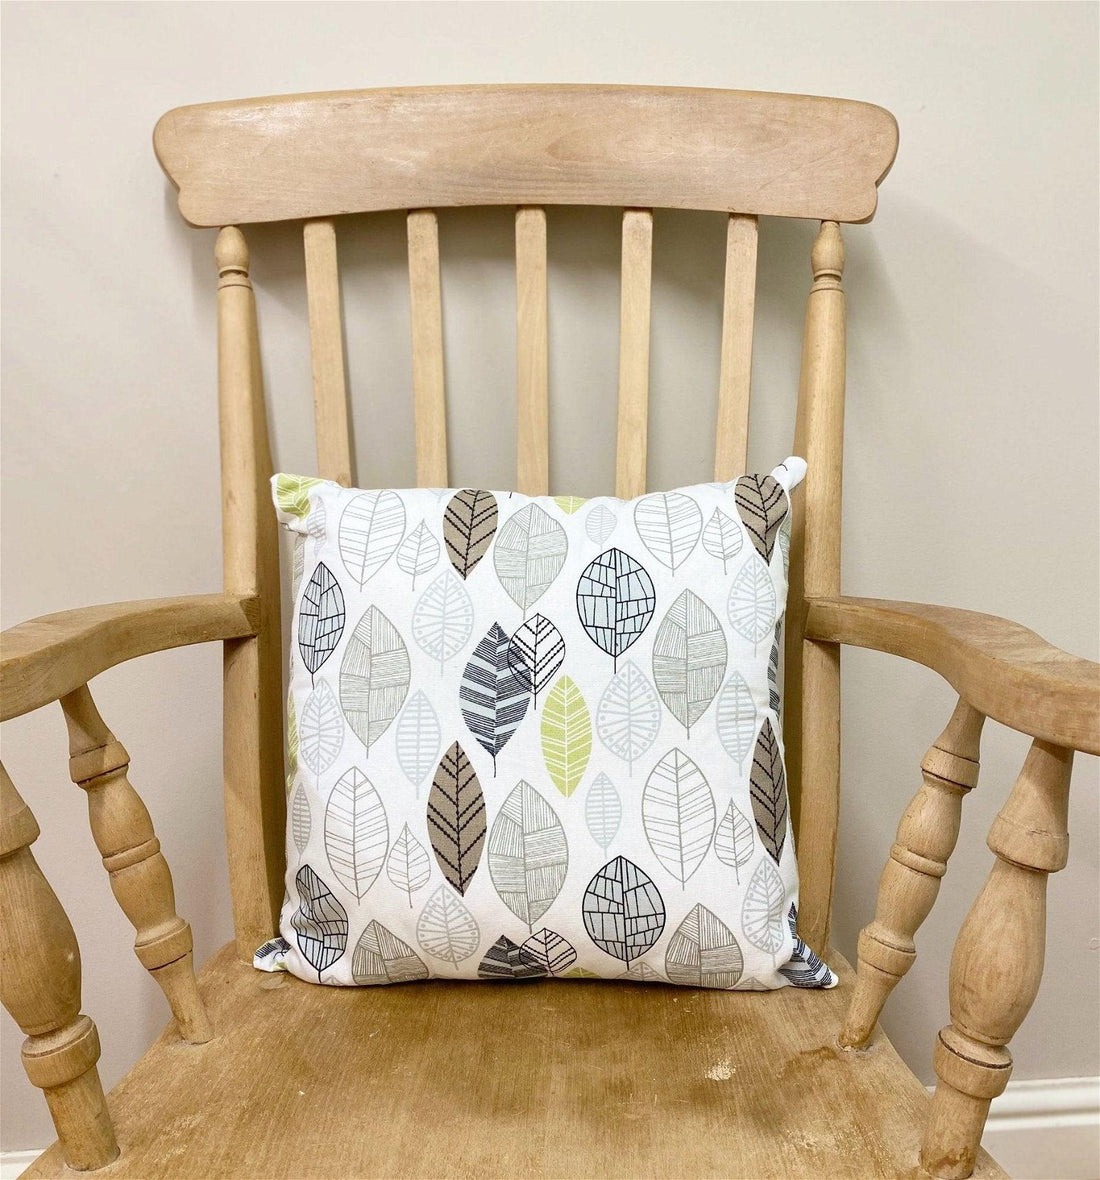 Scatter Cushion With Contemporary Green Leaf Print Design 37cm - £25.99 - Throw Pillows 